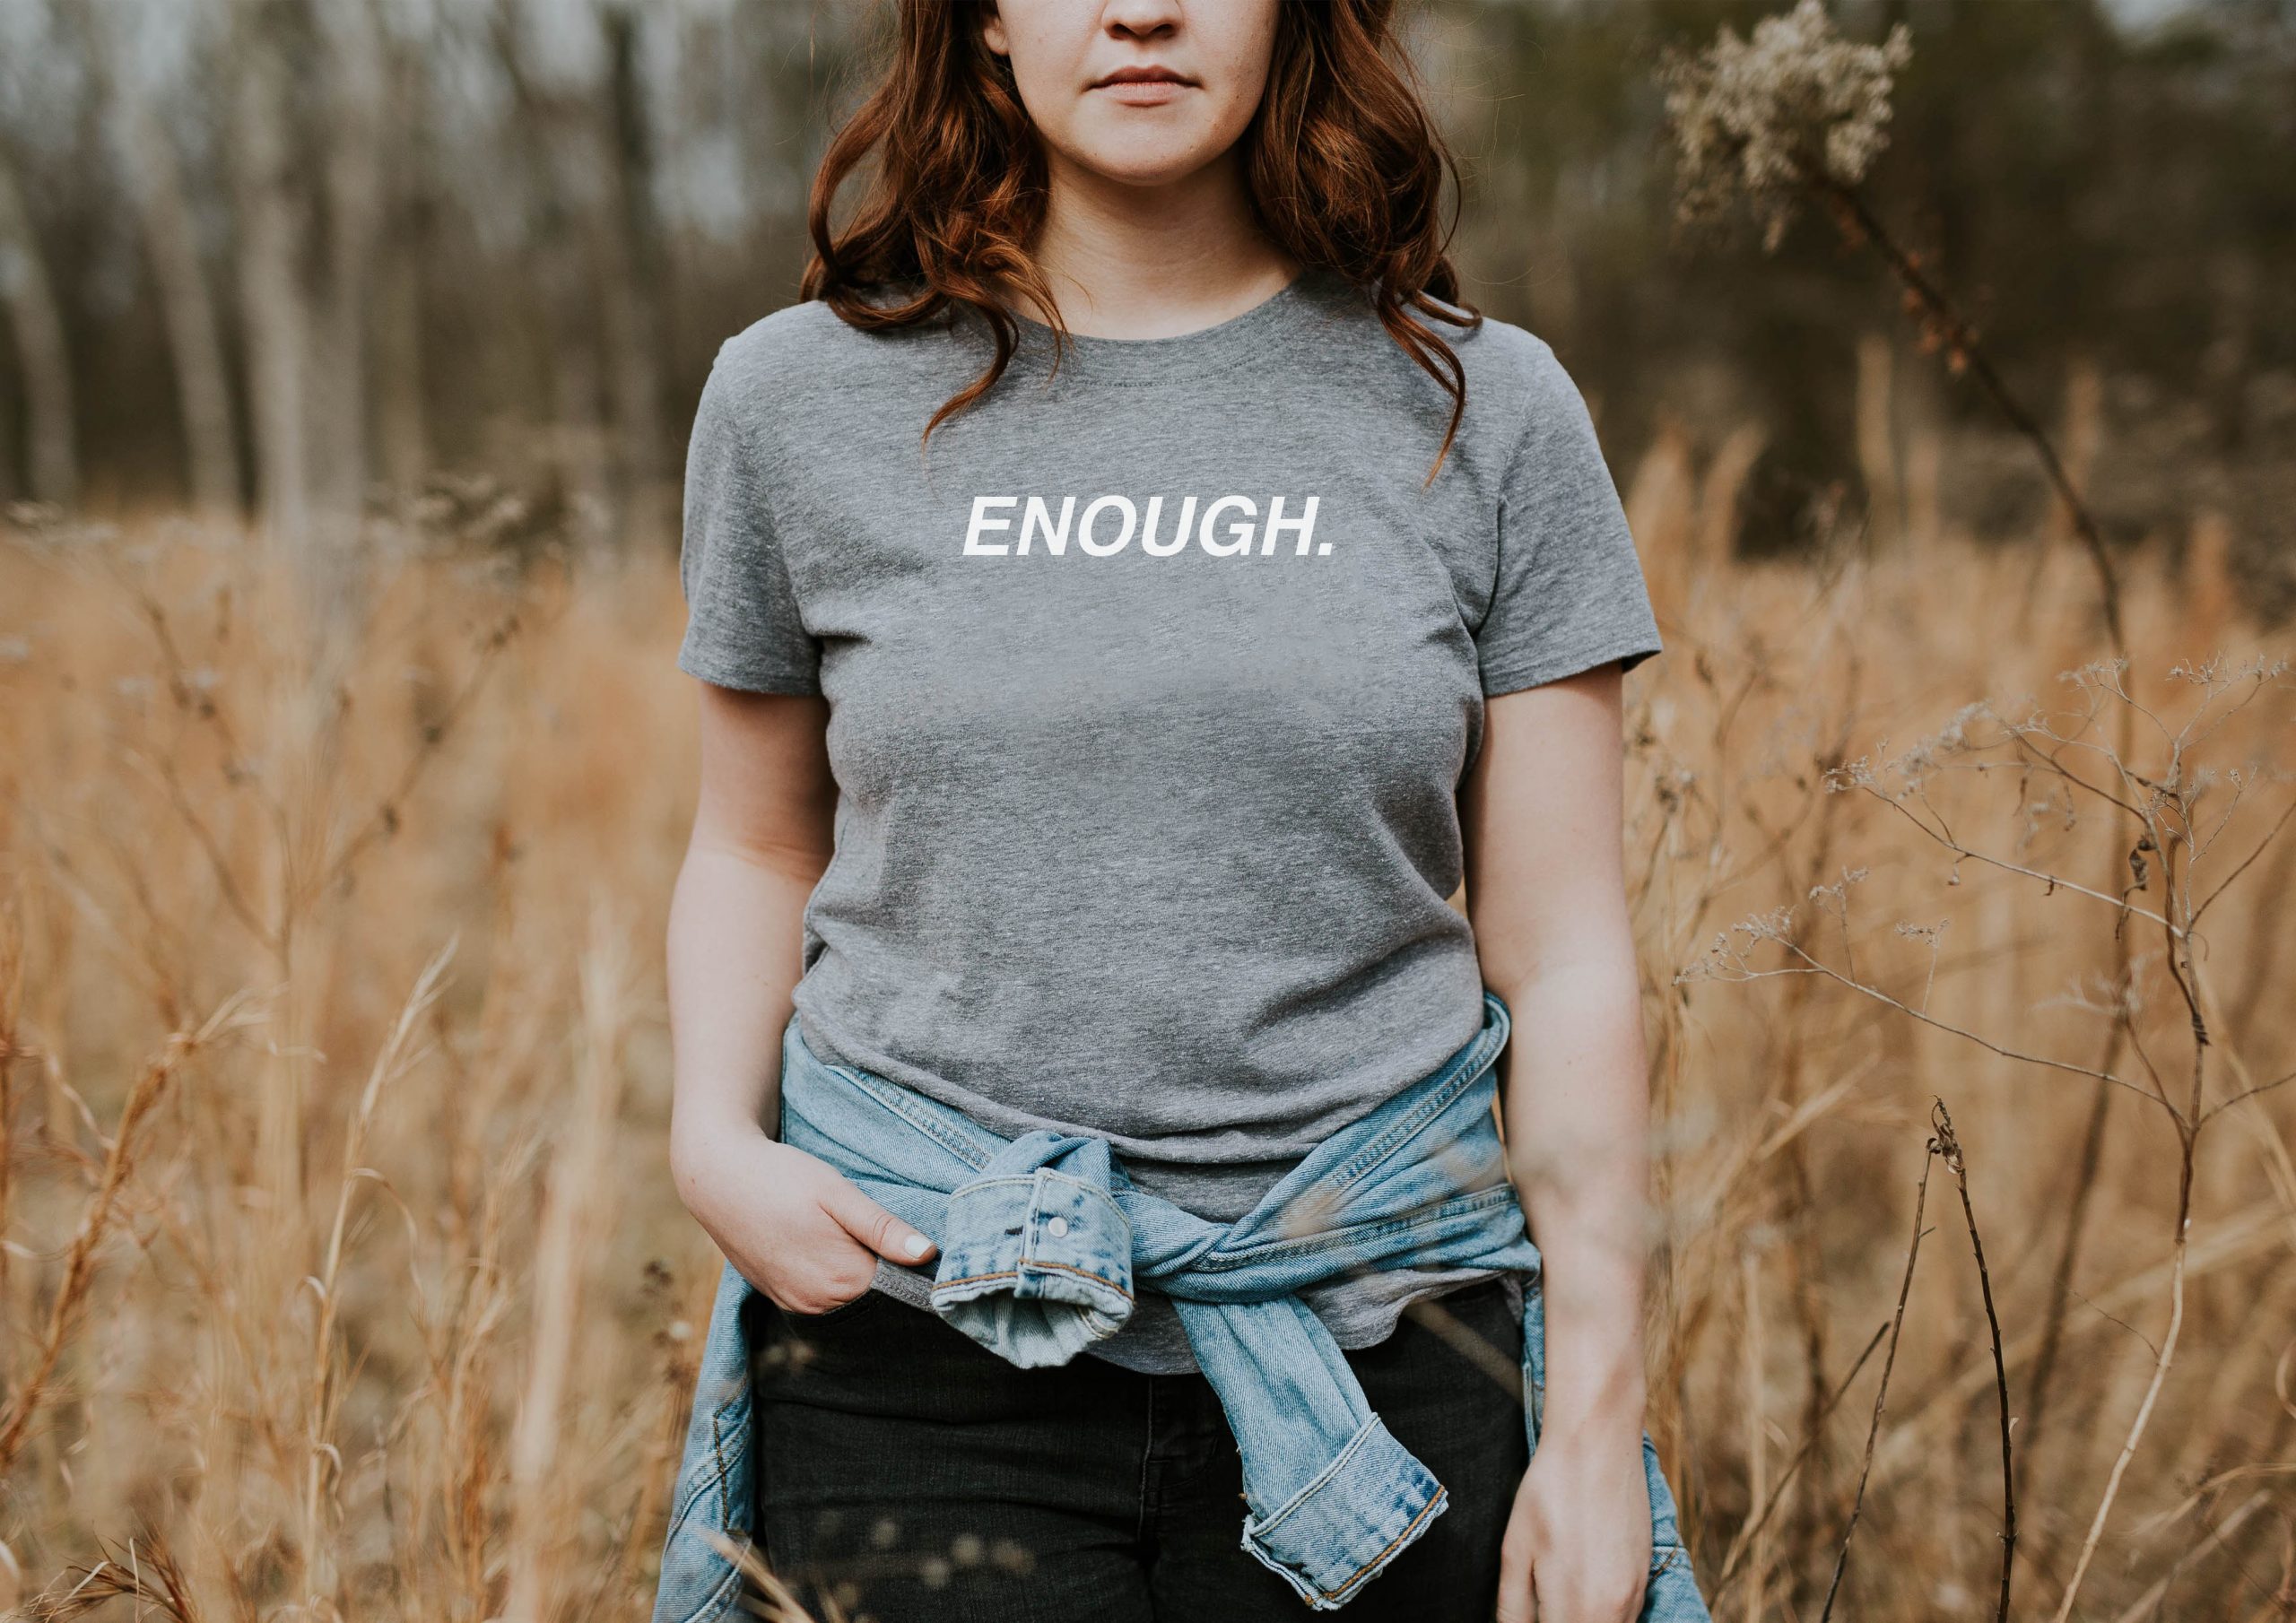 Woman stood in a field wearing grey t-shirt with the word 'enough' printed on